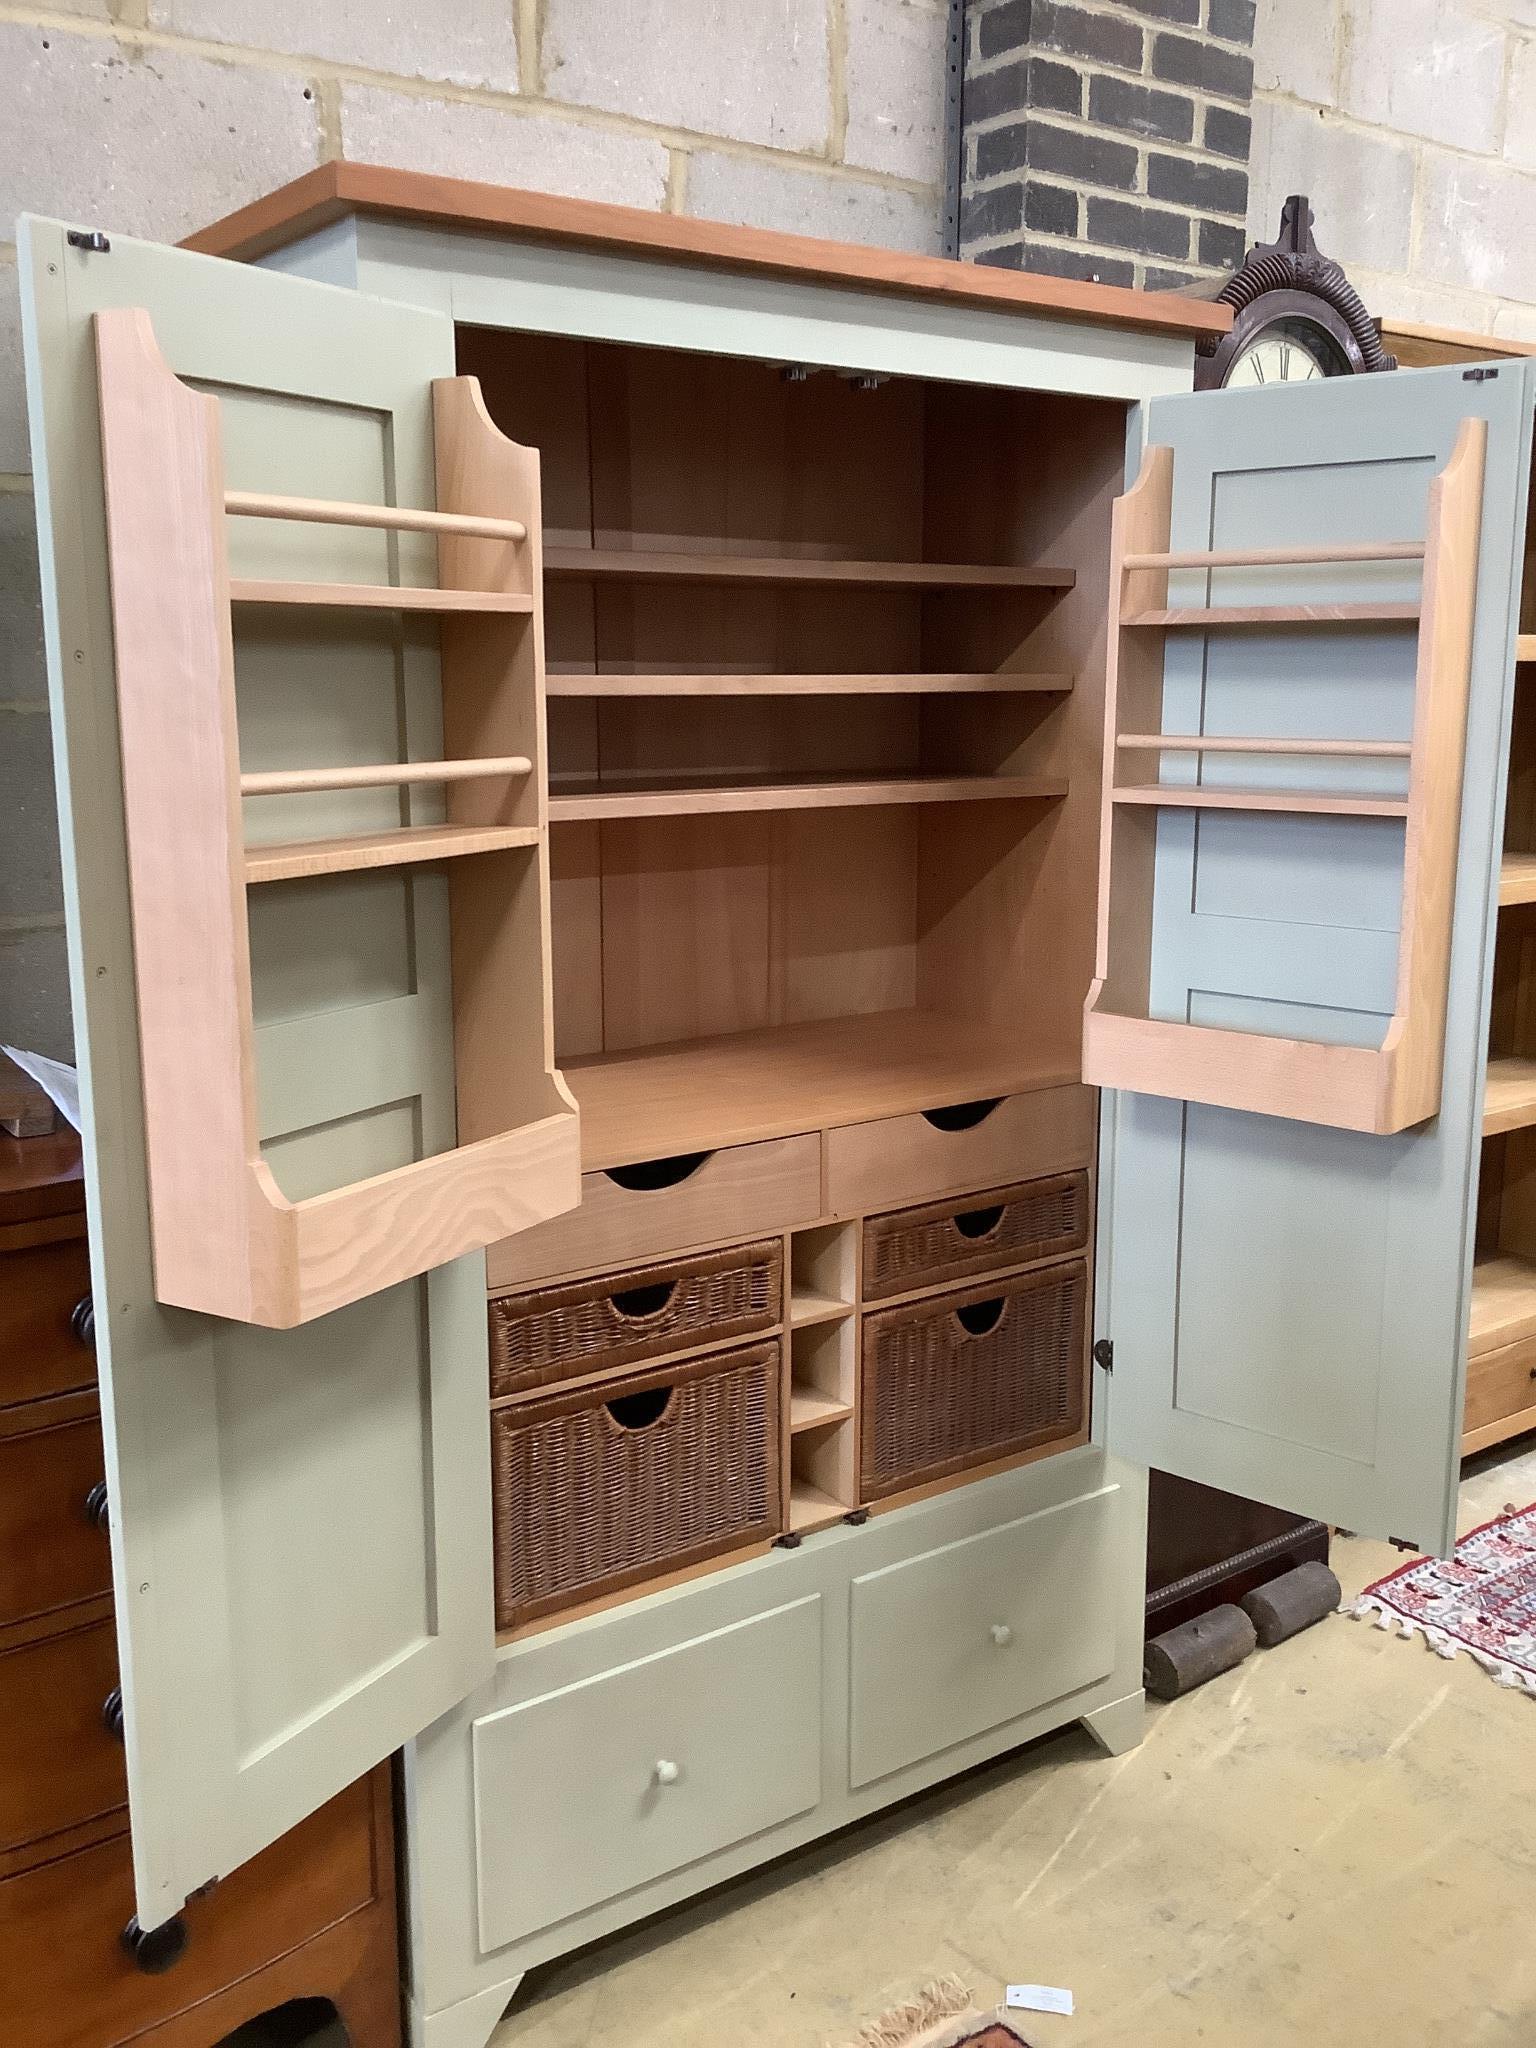 A modern light green painted kitchen cupboard, fitted shelves, racks, drawers and baskets, length 110cm, depth 51cm, height 183cm